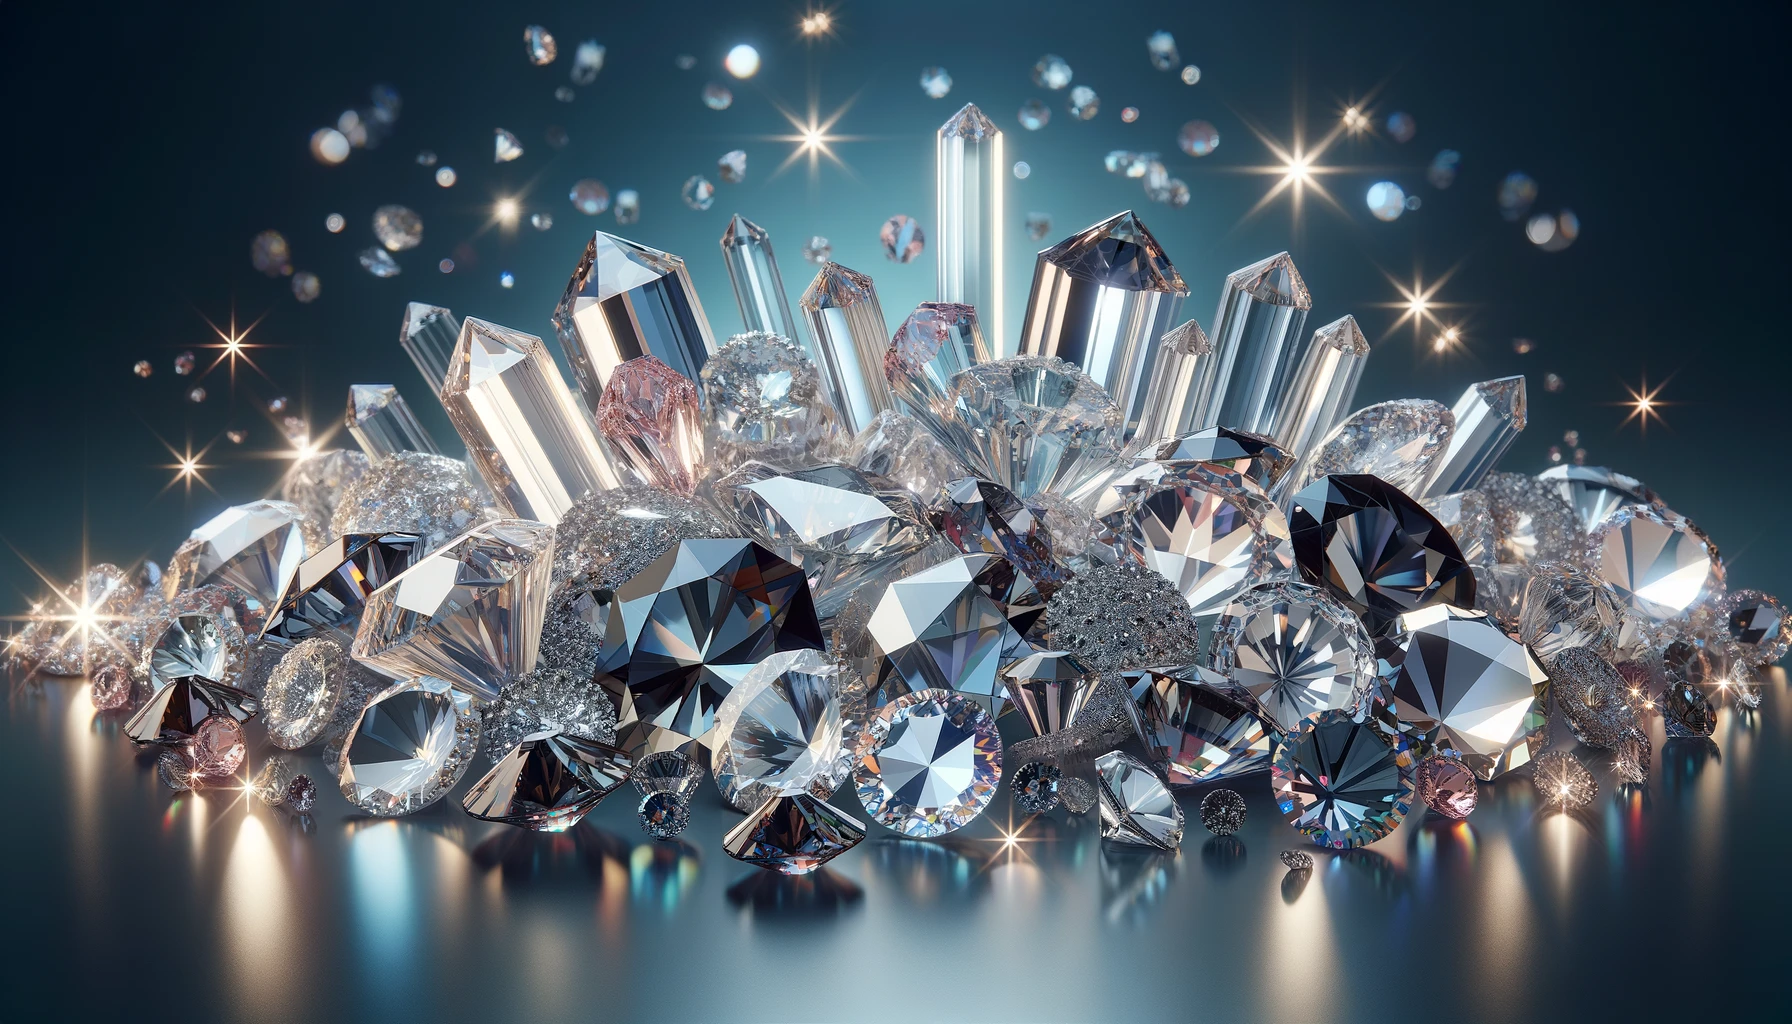 Wide, horizontal display of Swarovski® crystals in various shapes and colors, highlighting their sparkle and precision cuts against a simple, elegant background